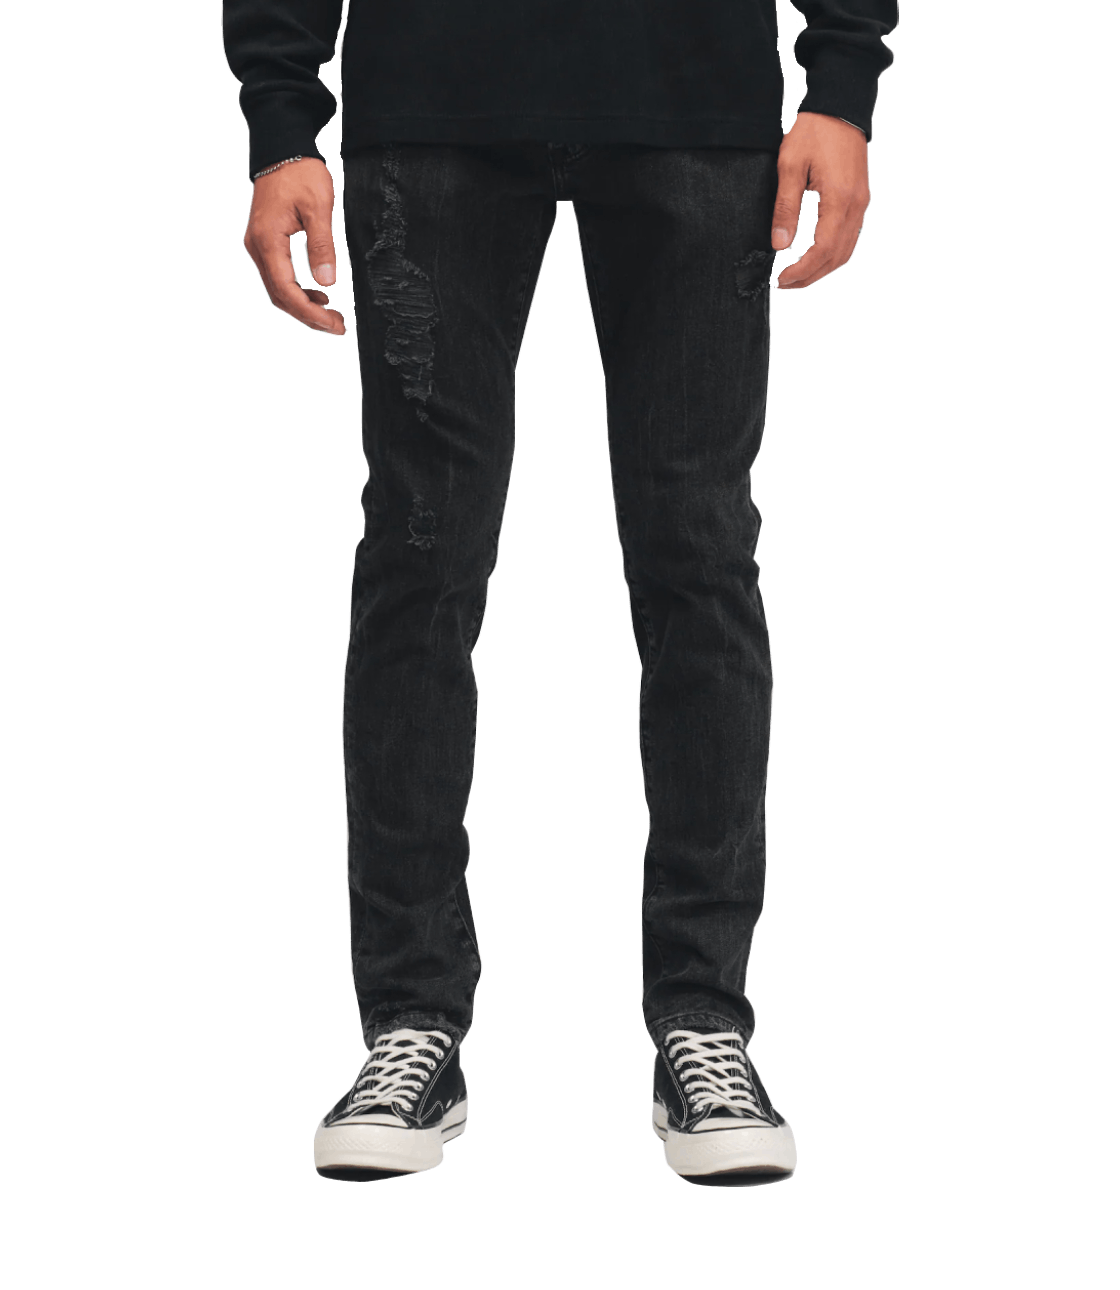 Quần Jeans Abercrombie & Fitch Super Skinny Fit 17